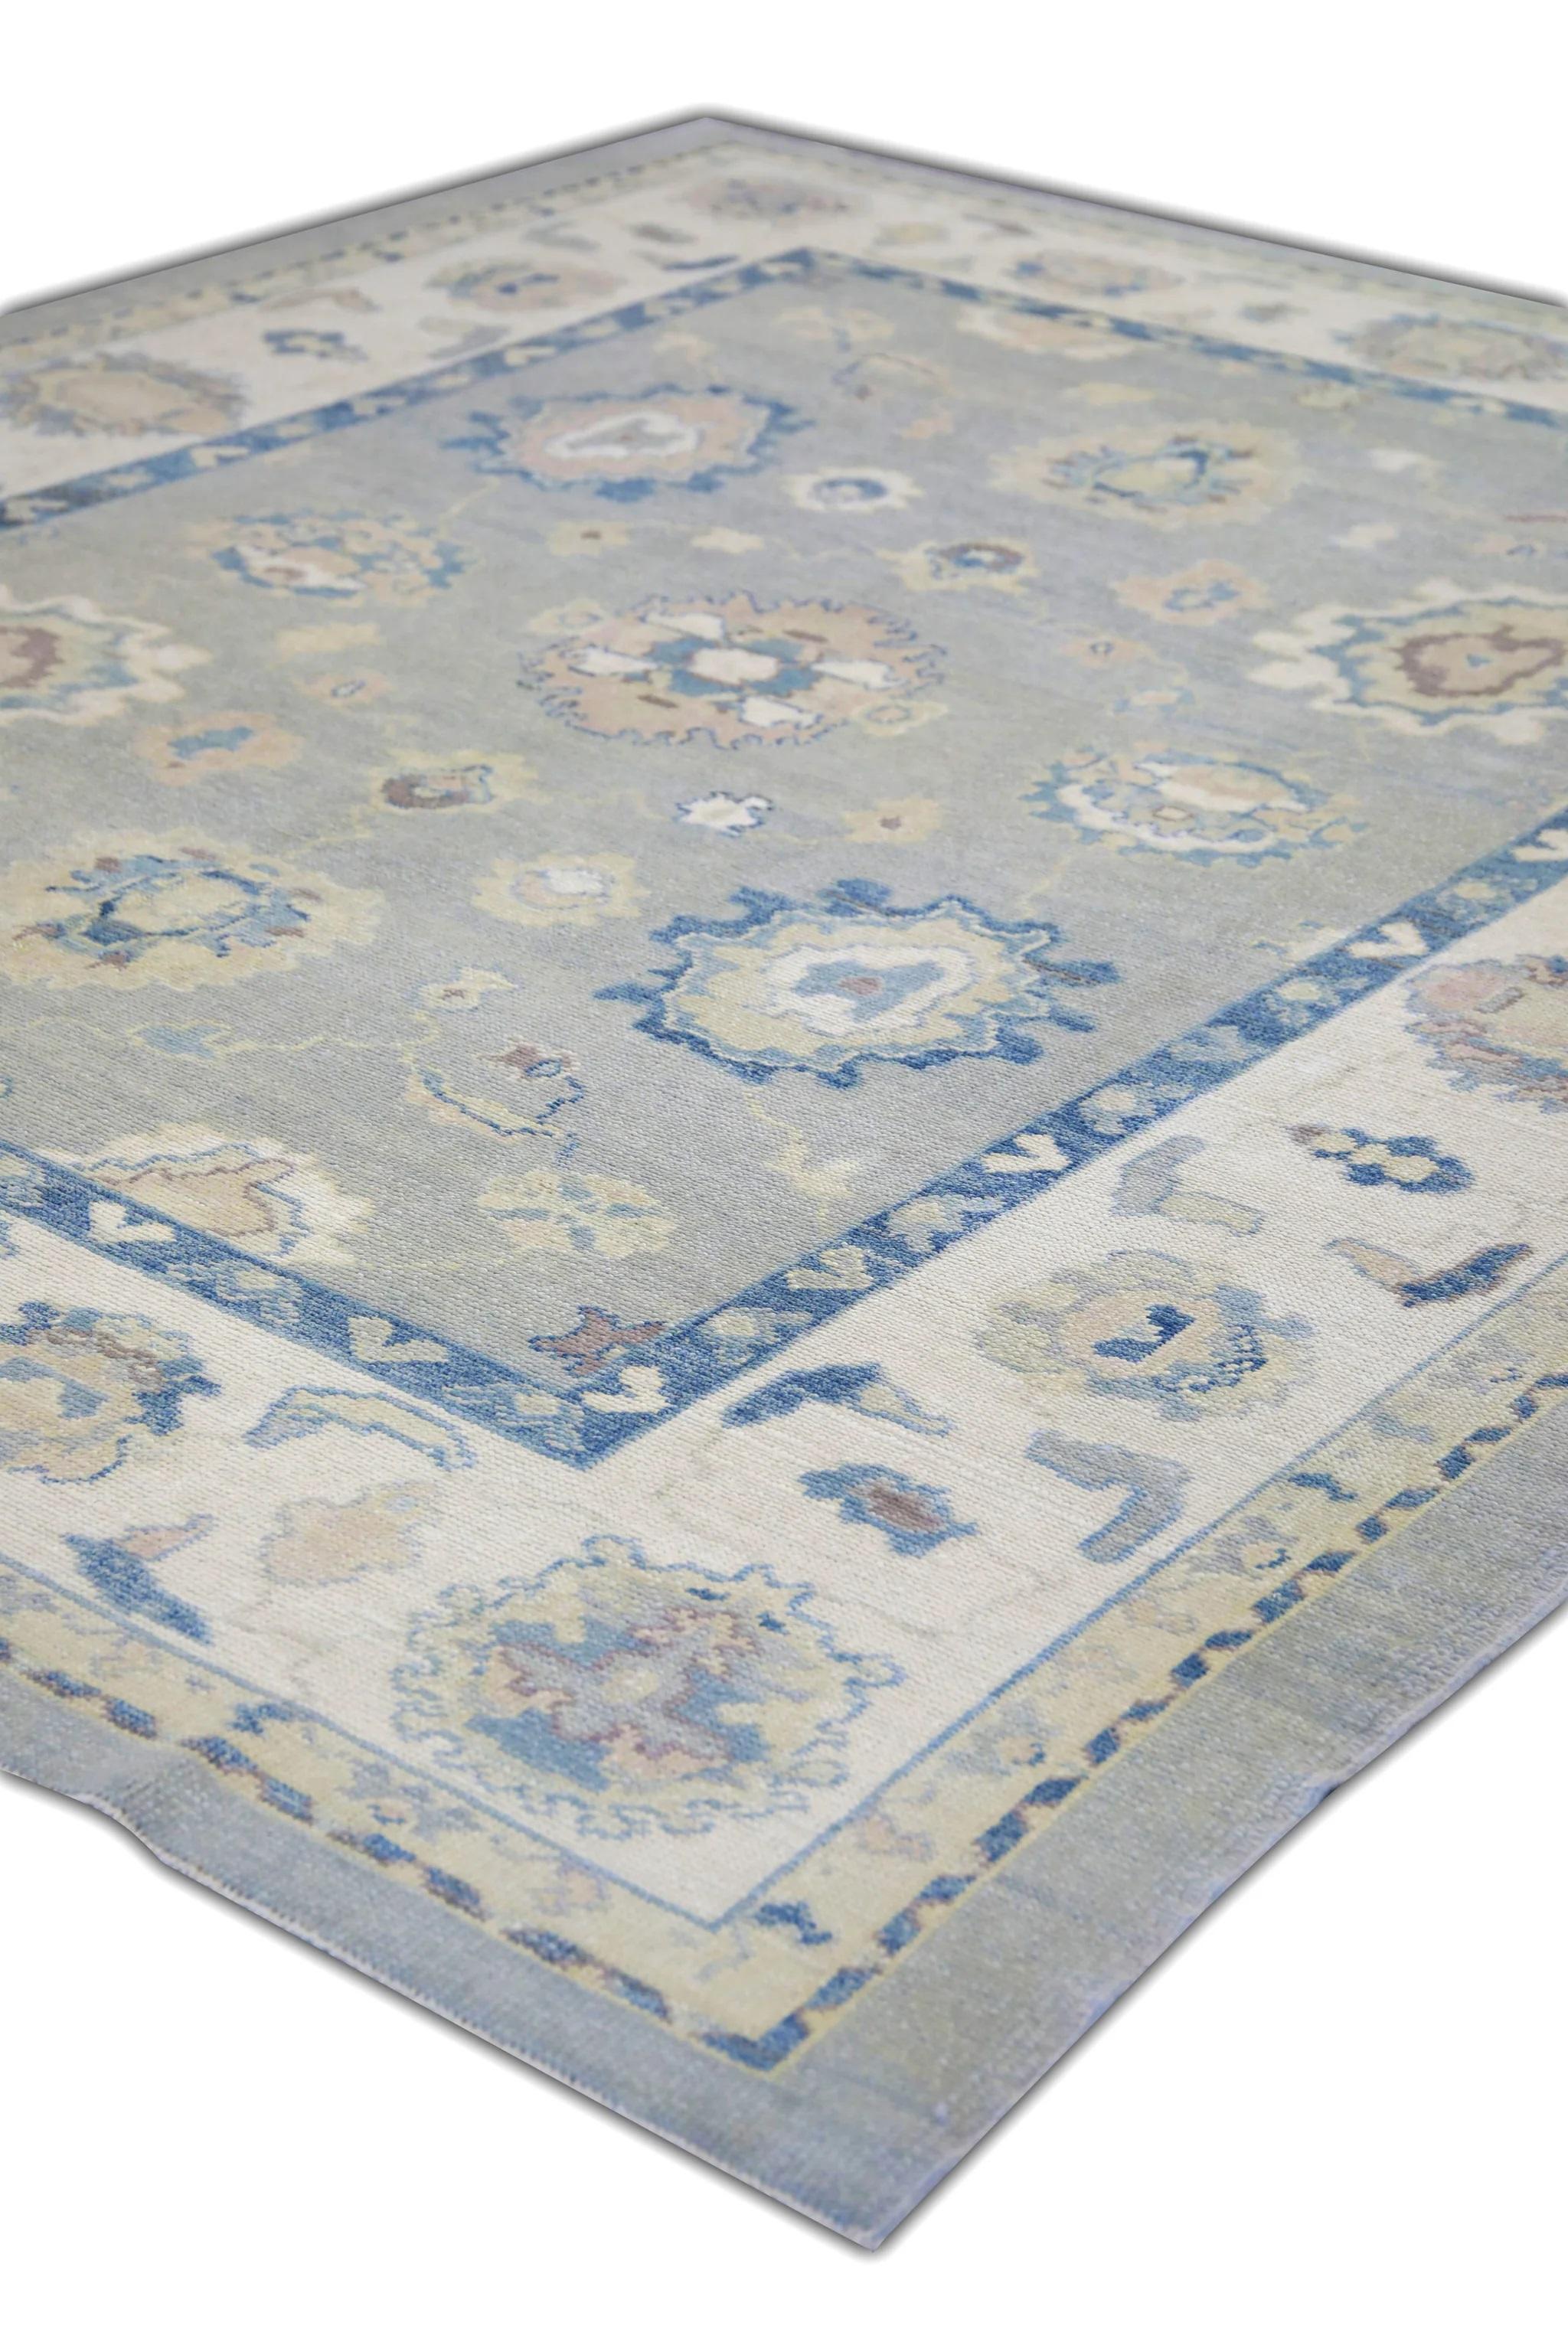 Contemporary Handwoven Wool Floral Turkish Oushak Rug in Shades of Blue 9' x 10'6